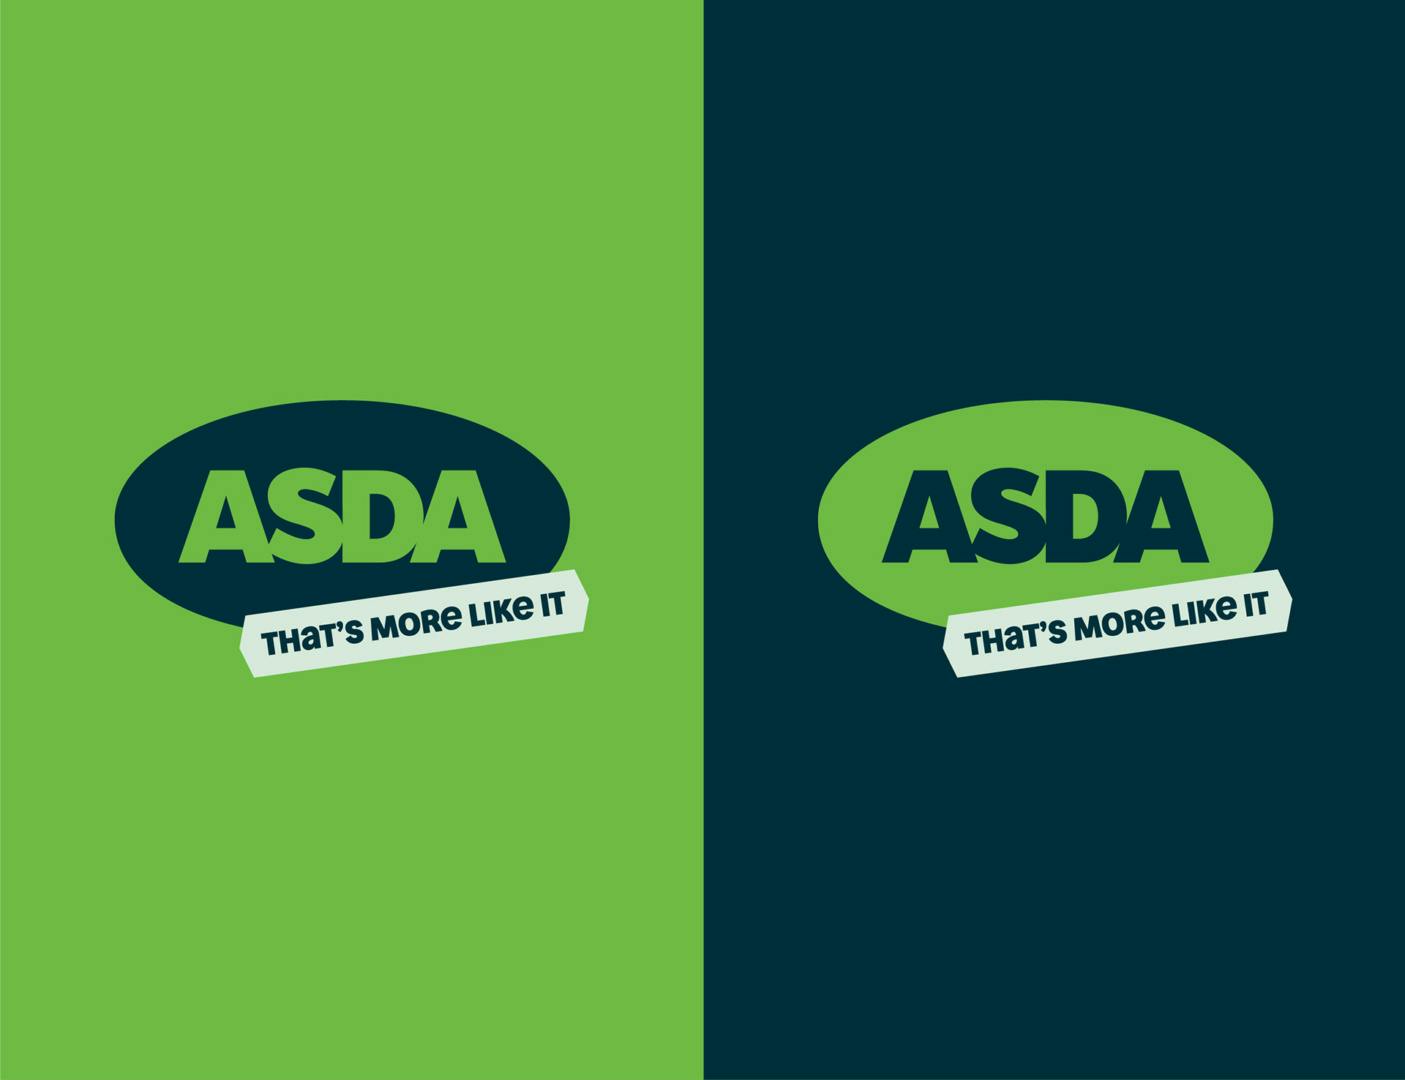 Oval shaped Asda logos displayed in bright green and very dark green